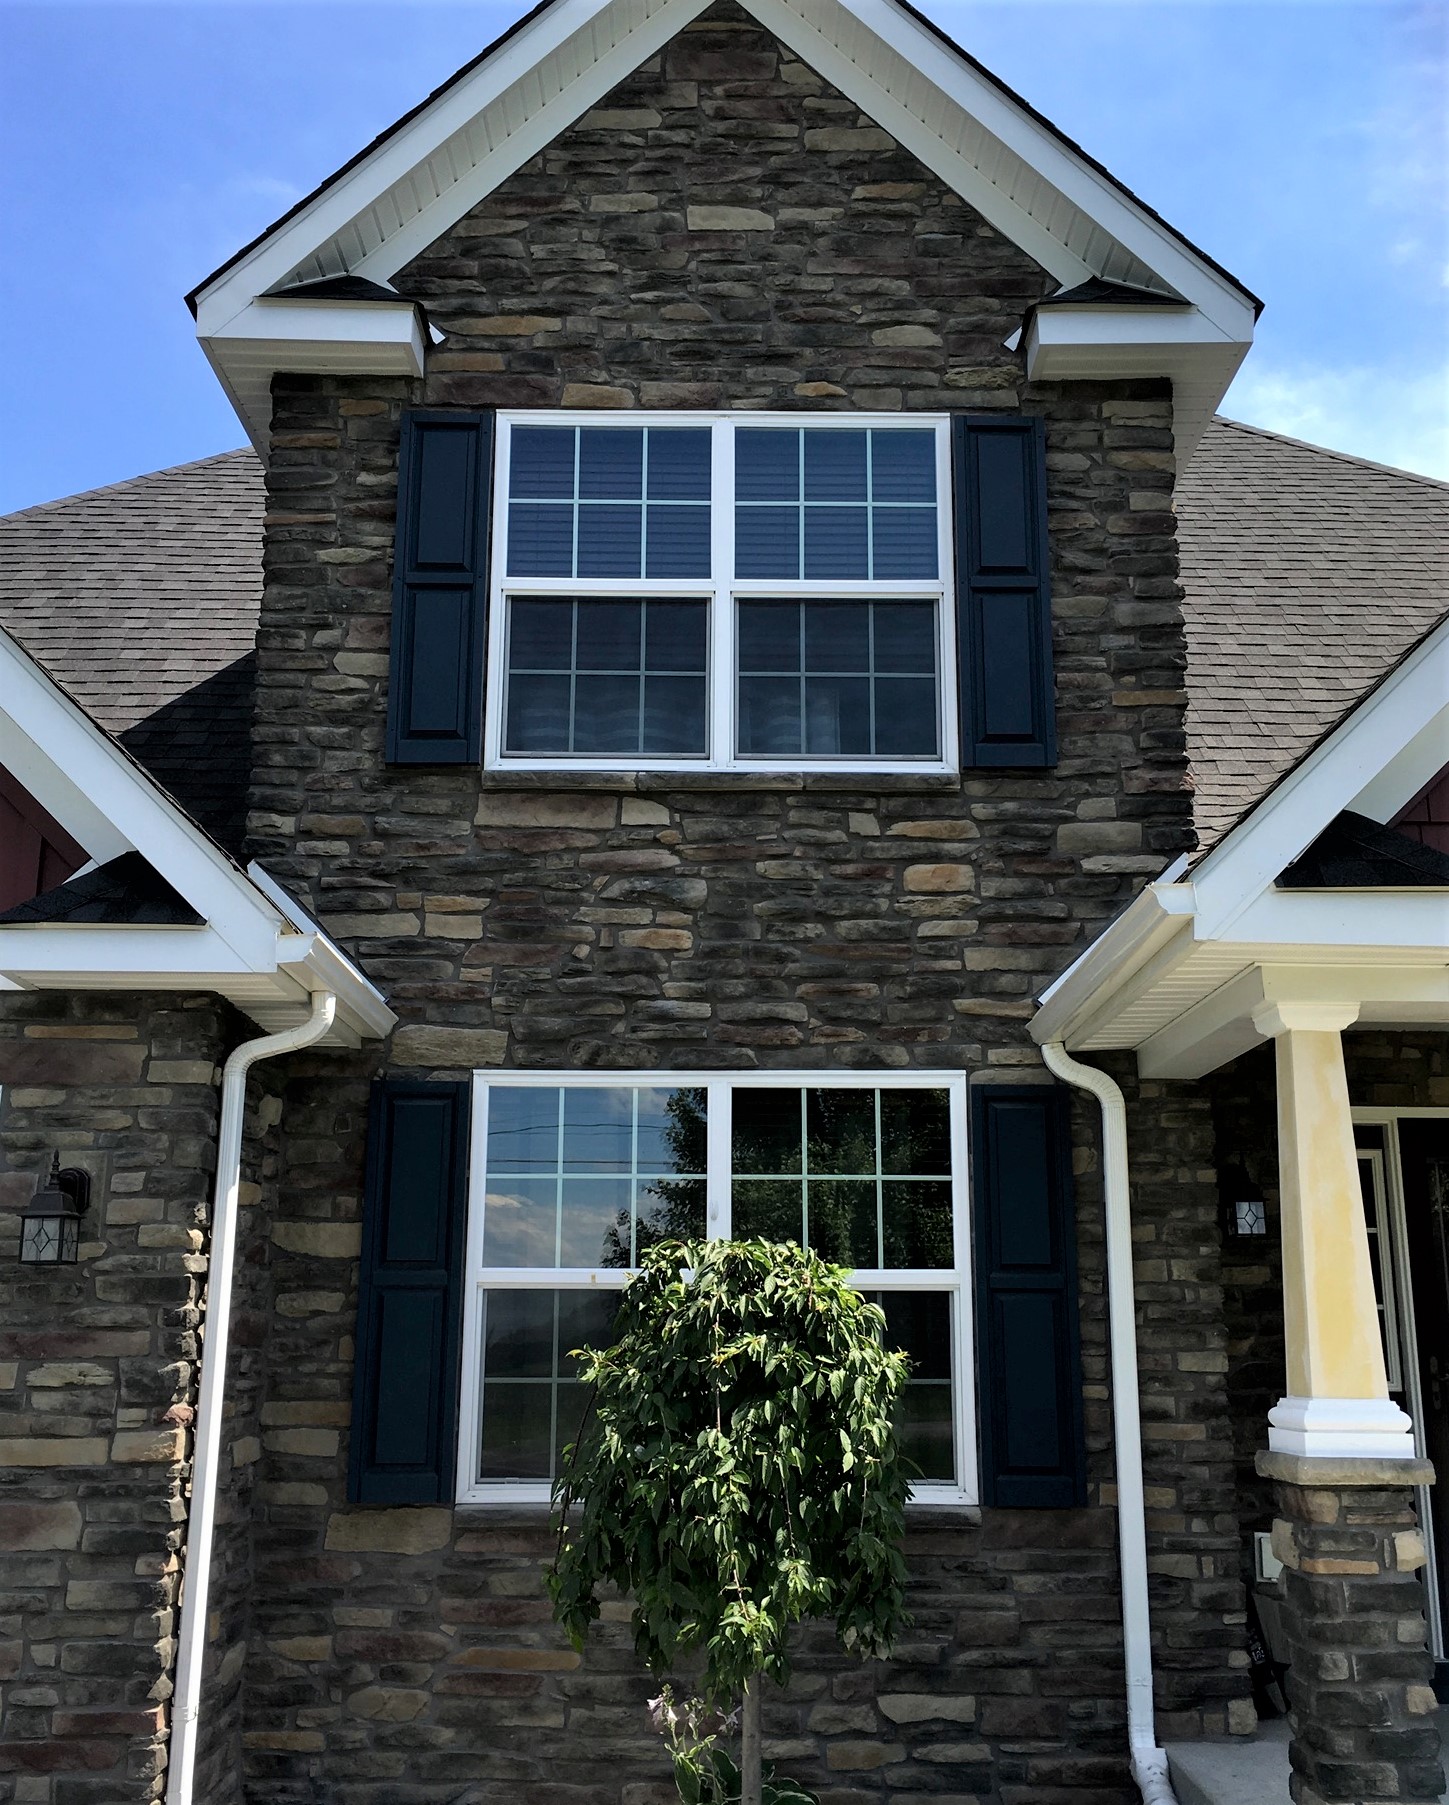 Home exterior with stone veneer and white windows with black shutters